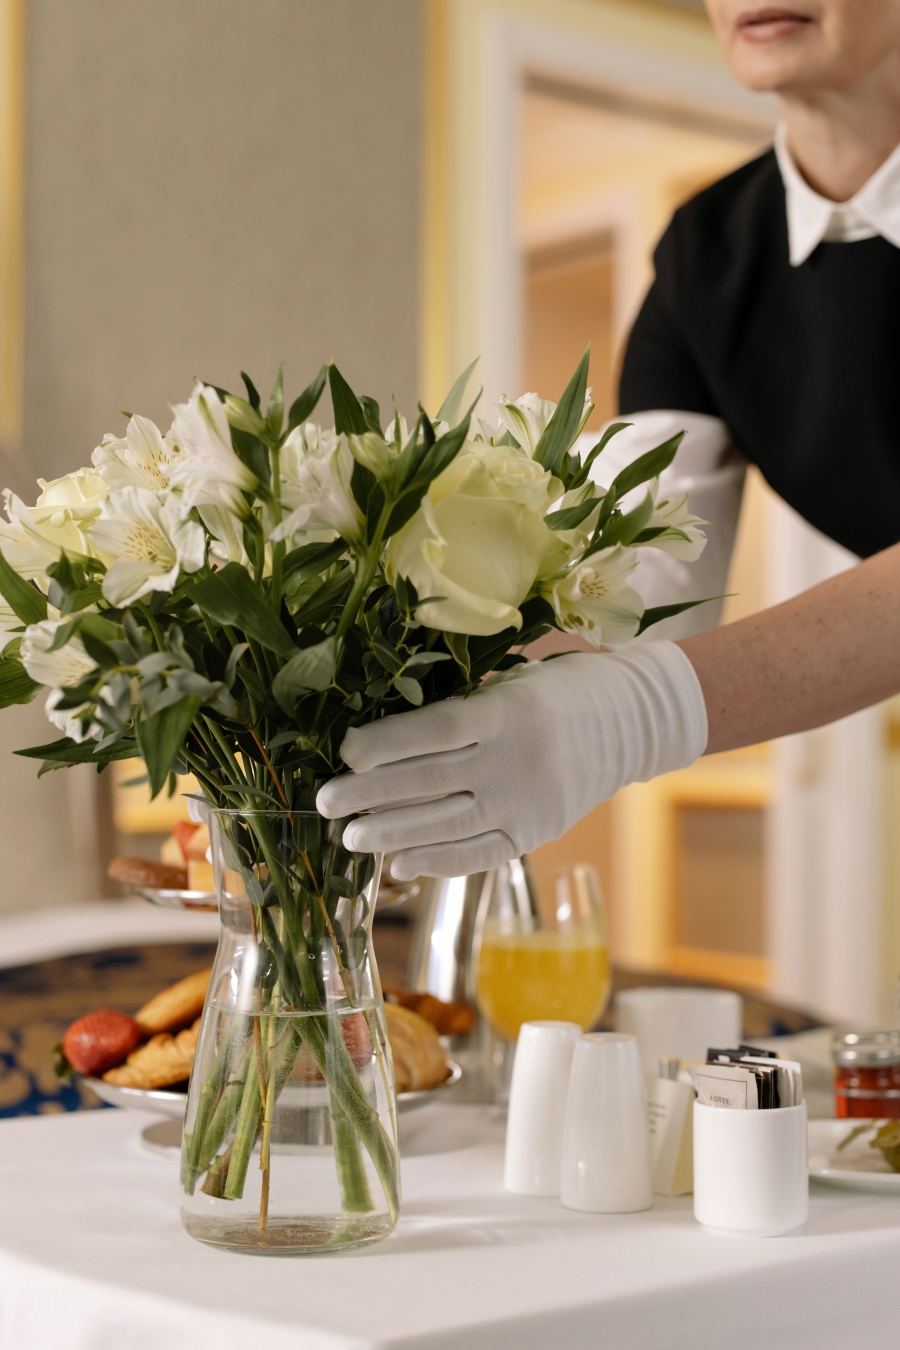 From Basic Cleaning to White-Glove Service: Choosing the Right Home Care Solution